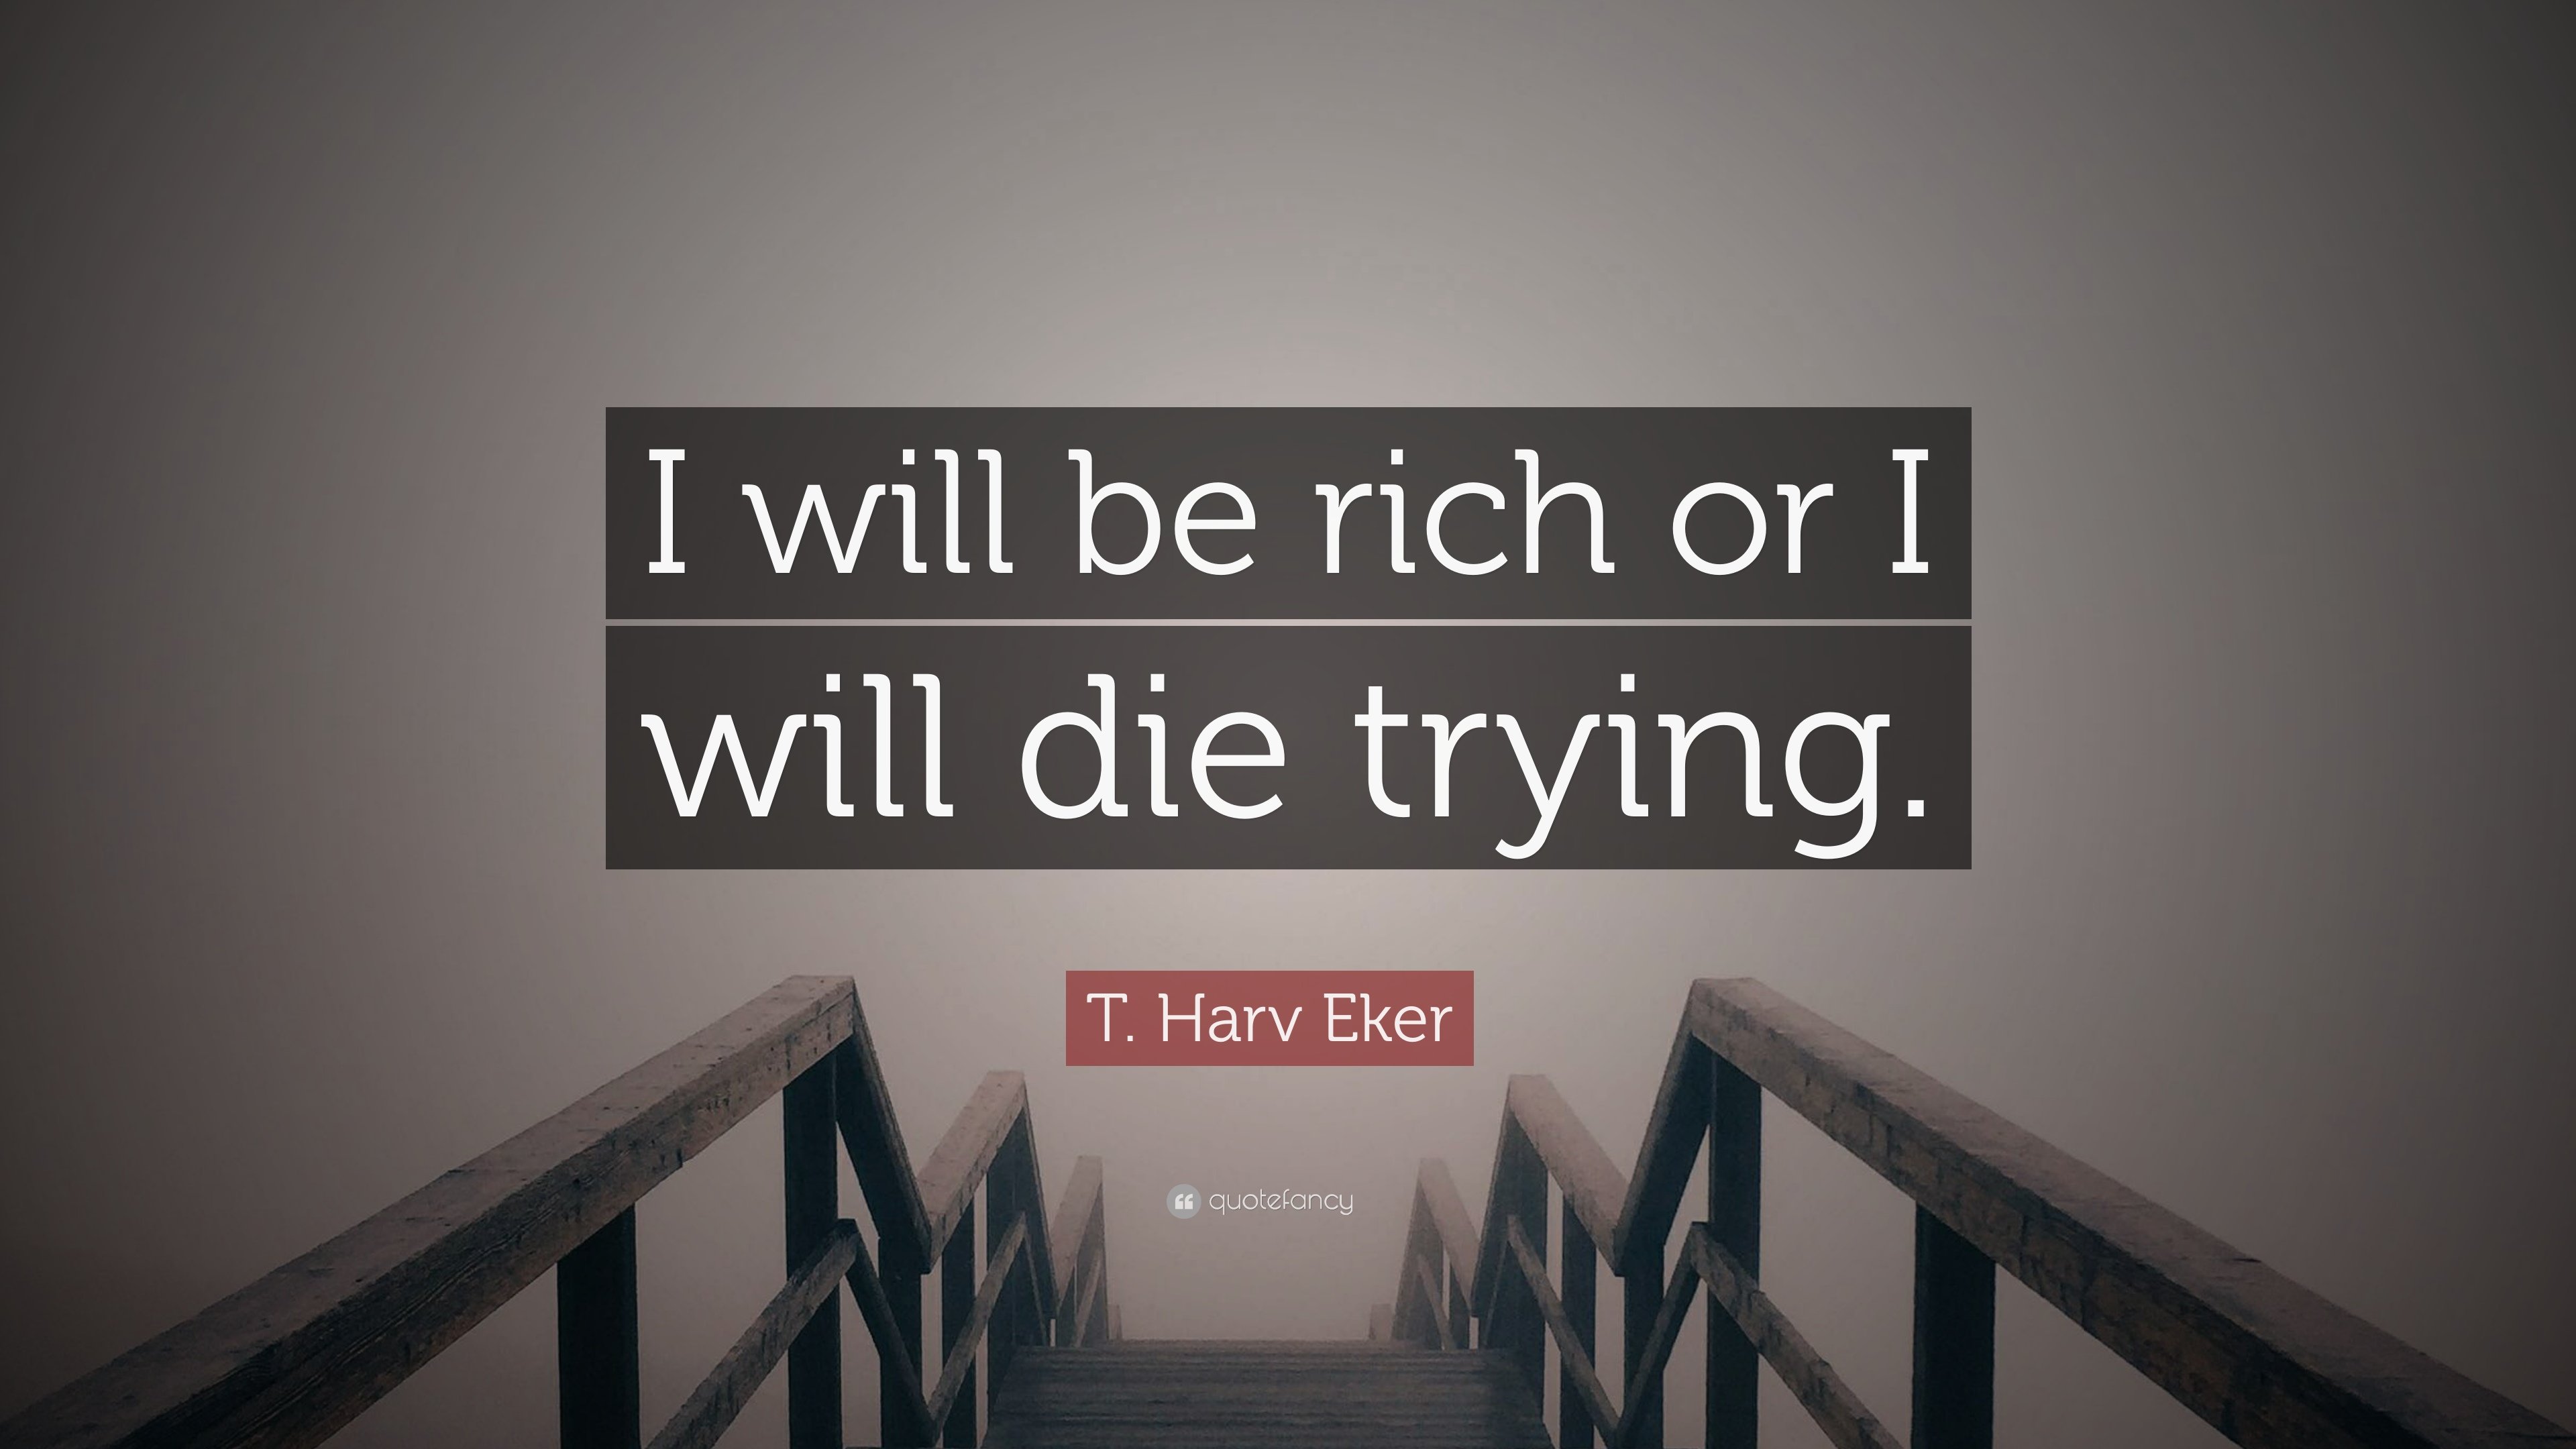 T. Harv Eker Quote: “I will be rich or I will die trying.”